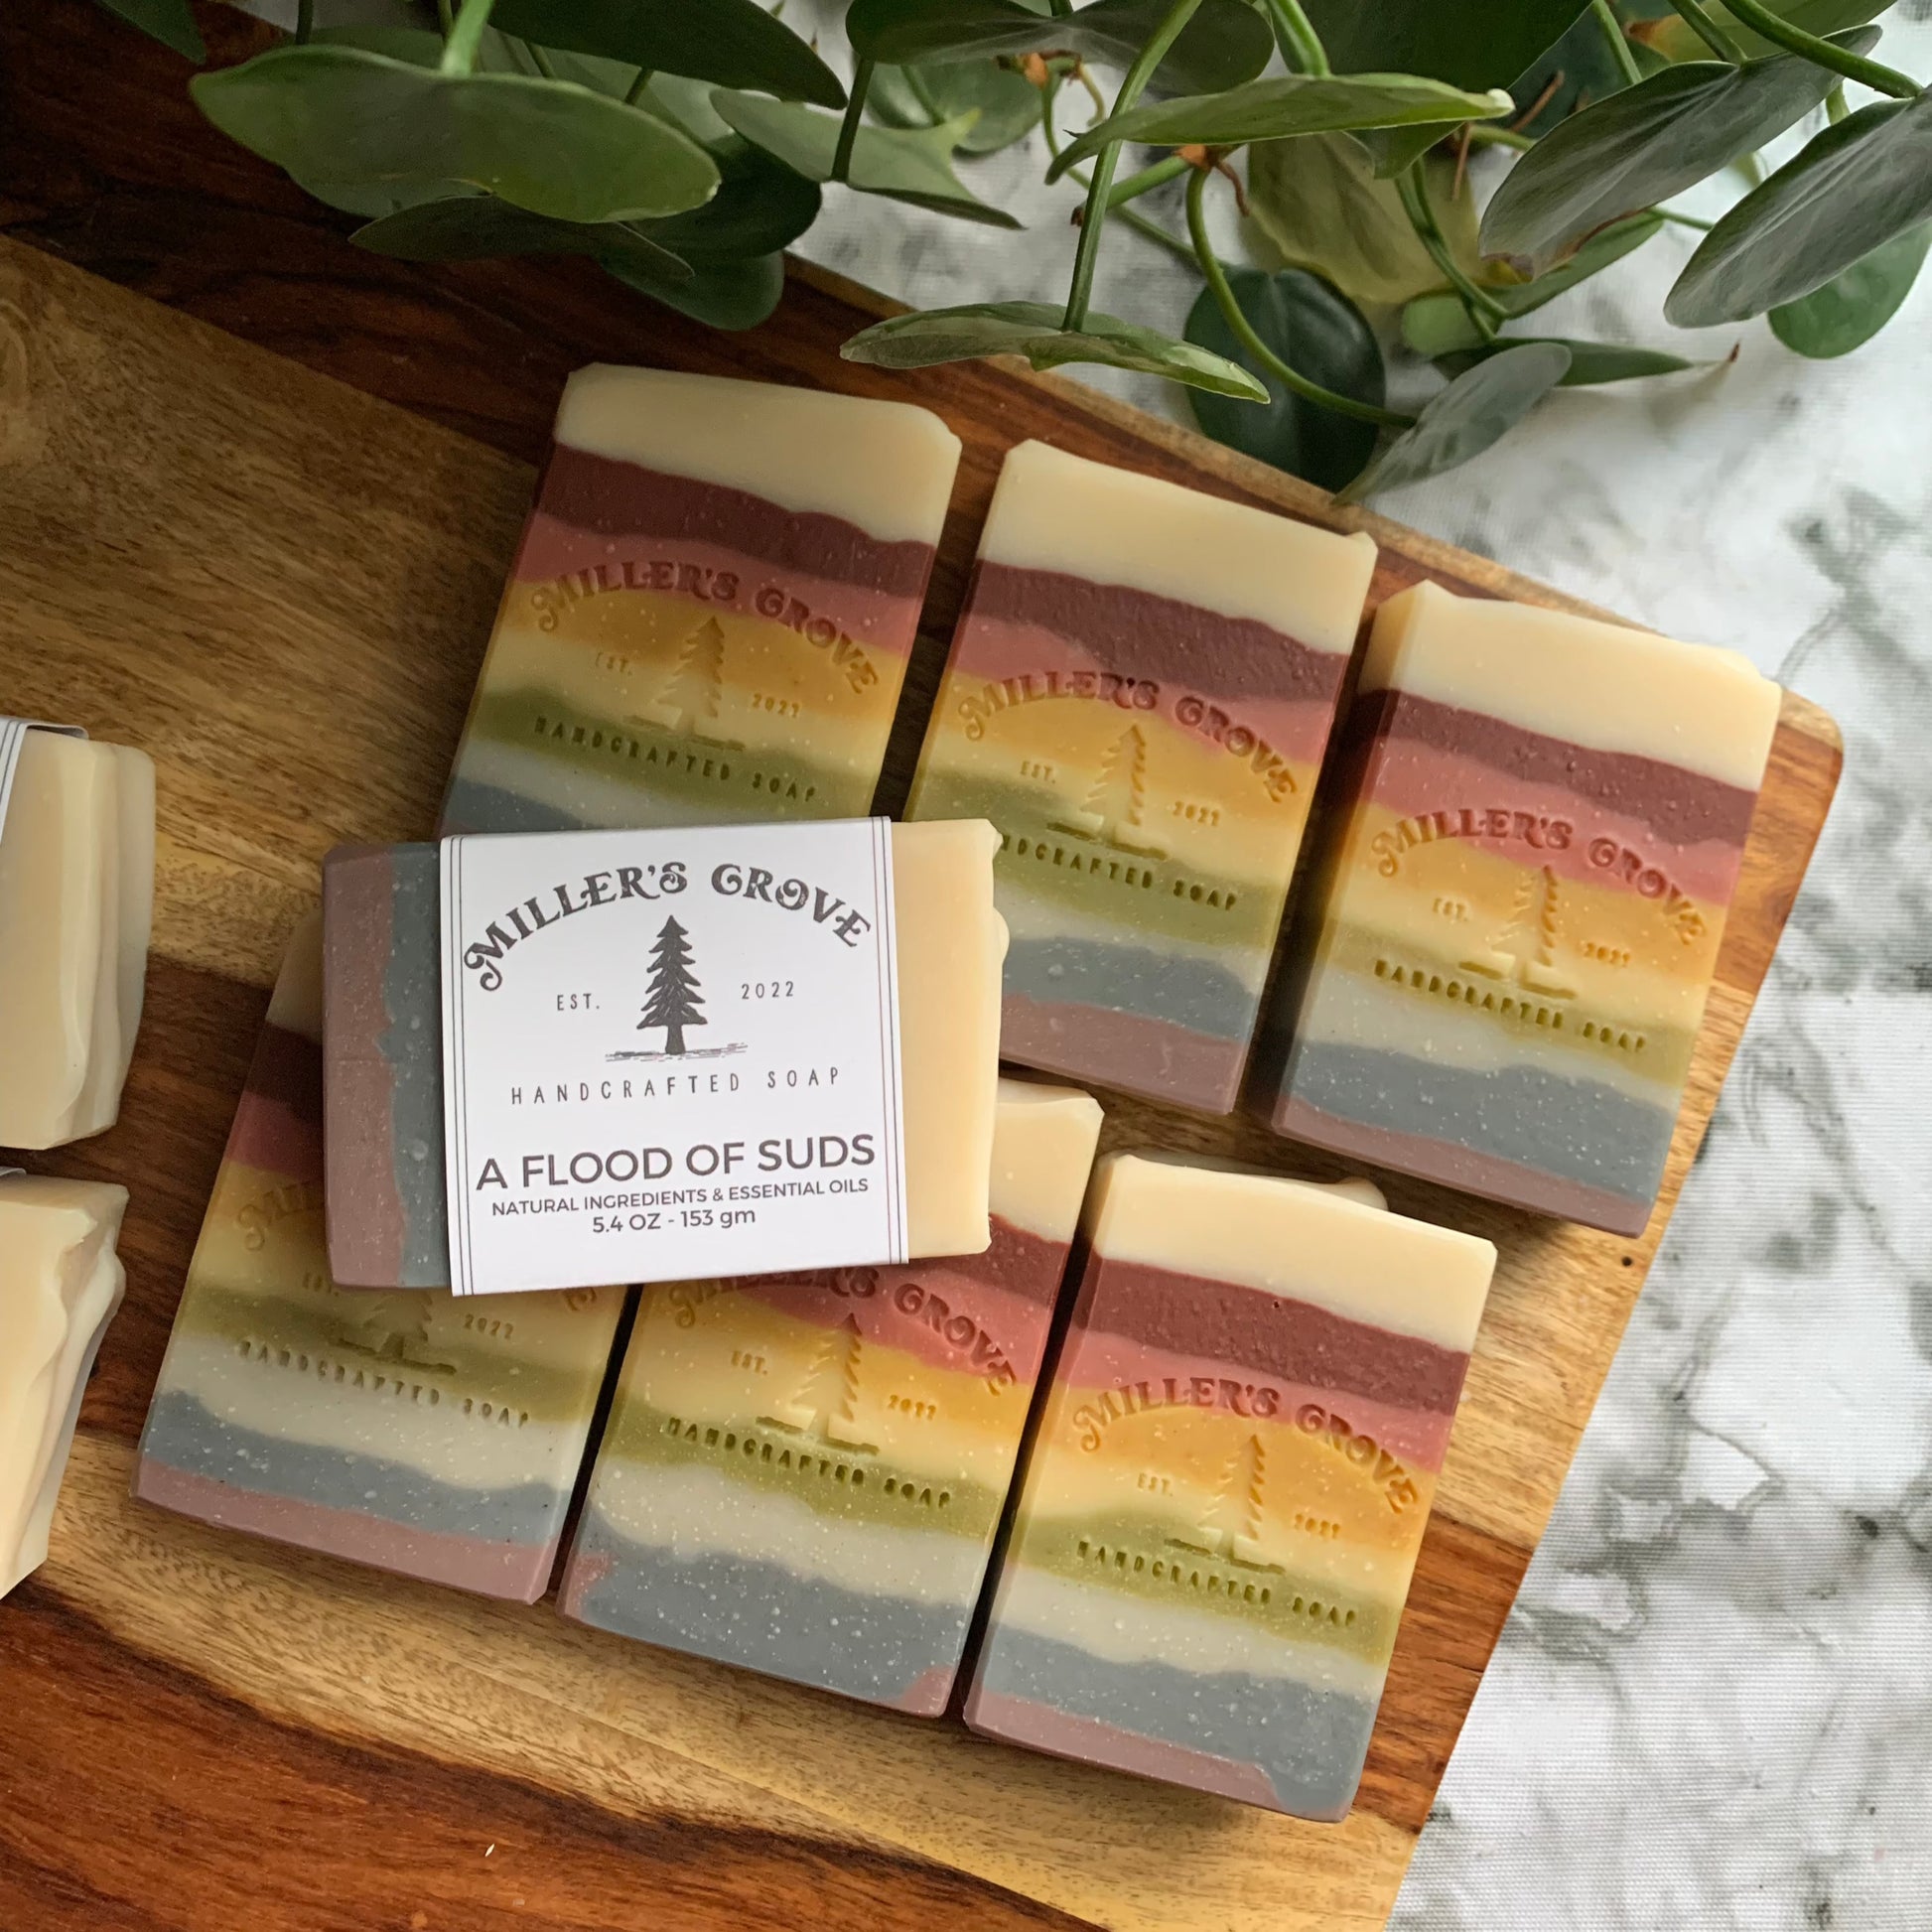 rainbow colored soap bars names "A Flood of Suds"